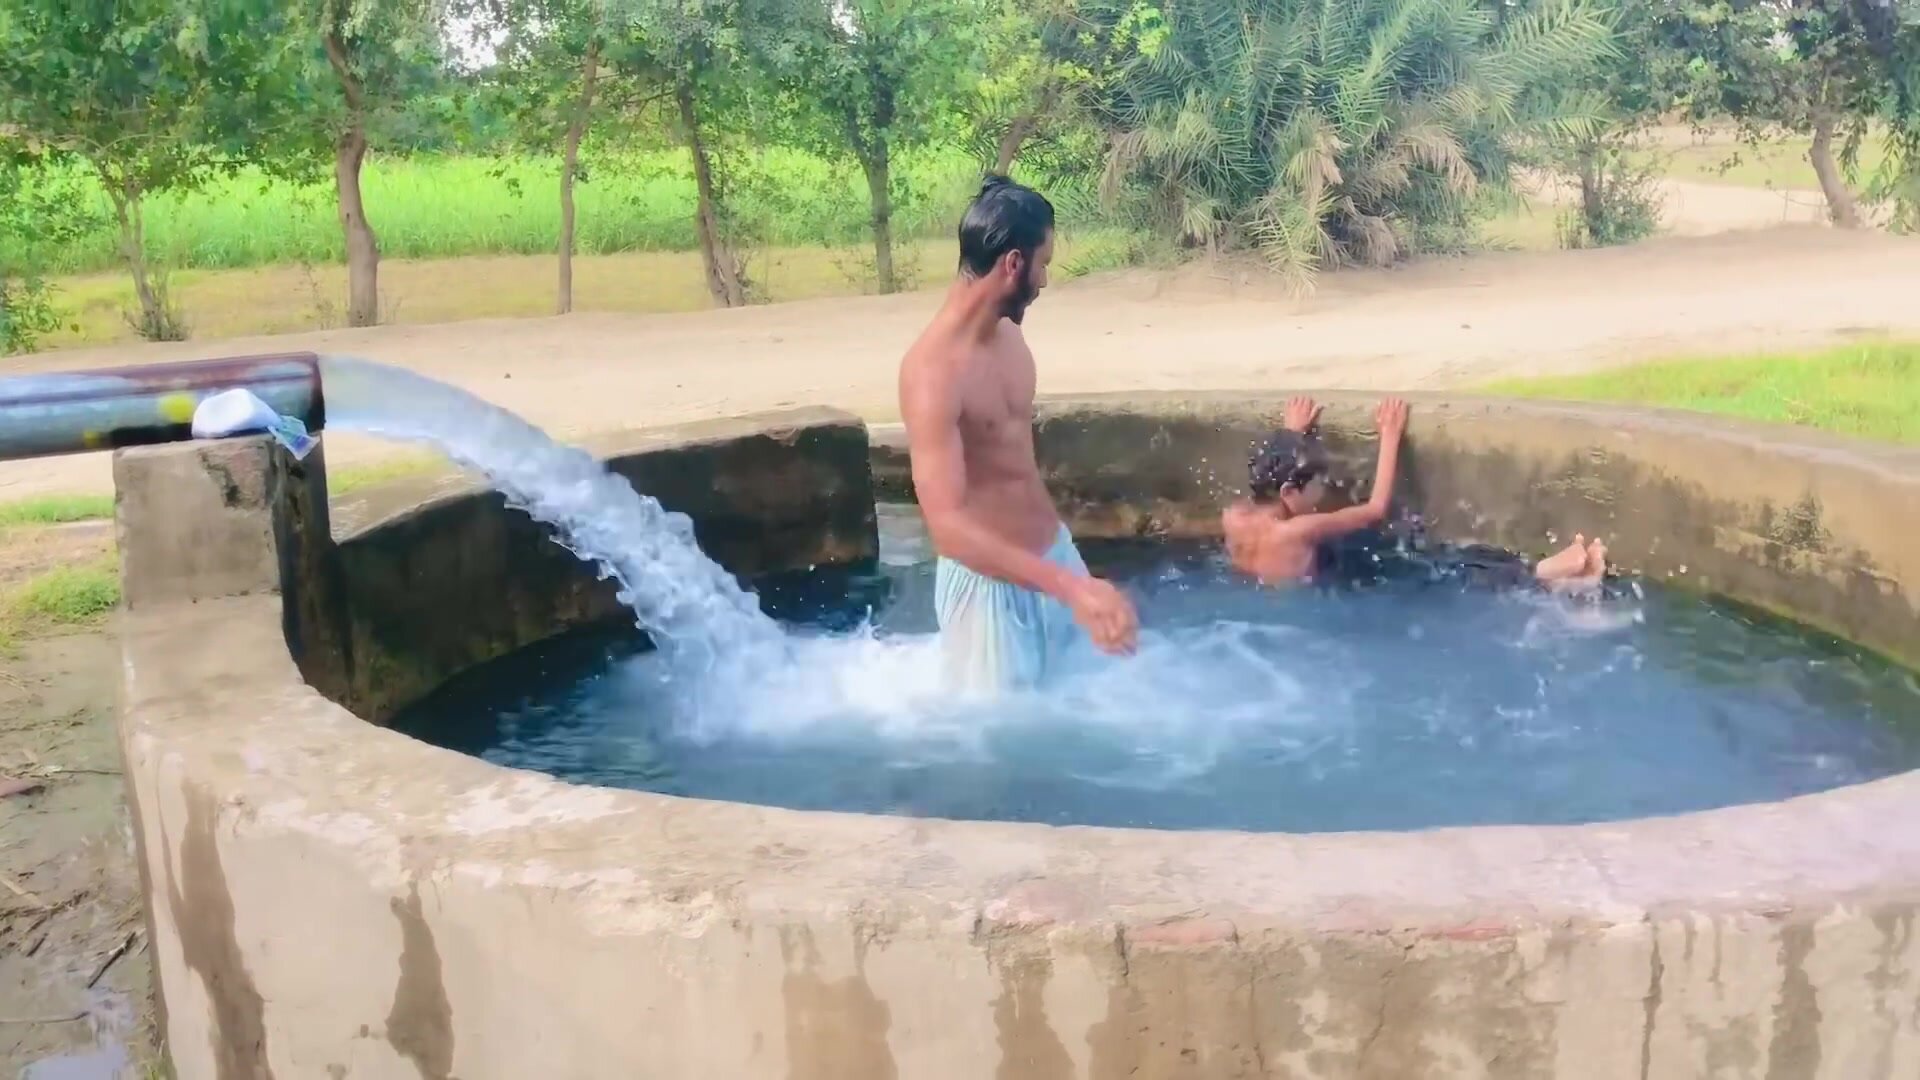 Paki boys in water, changing clothes, pissing (no nude)